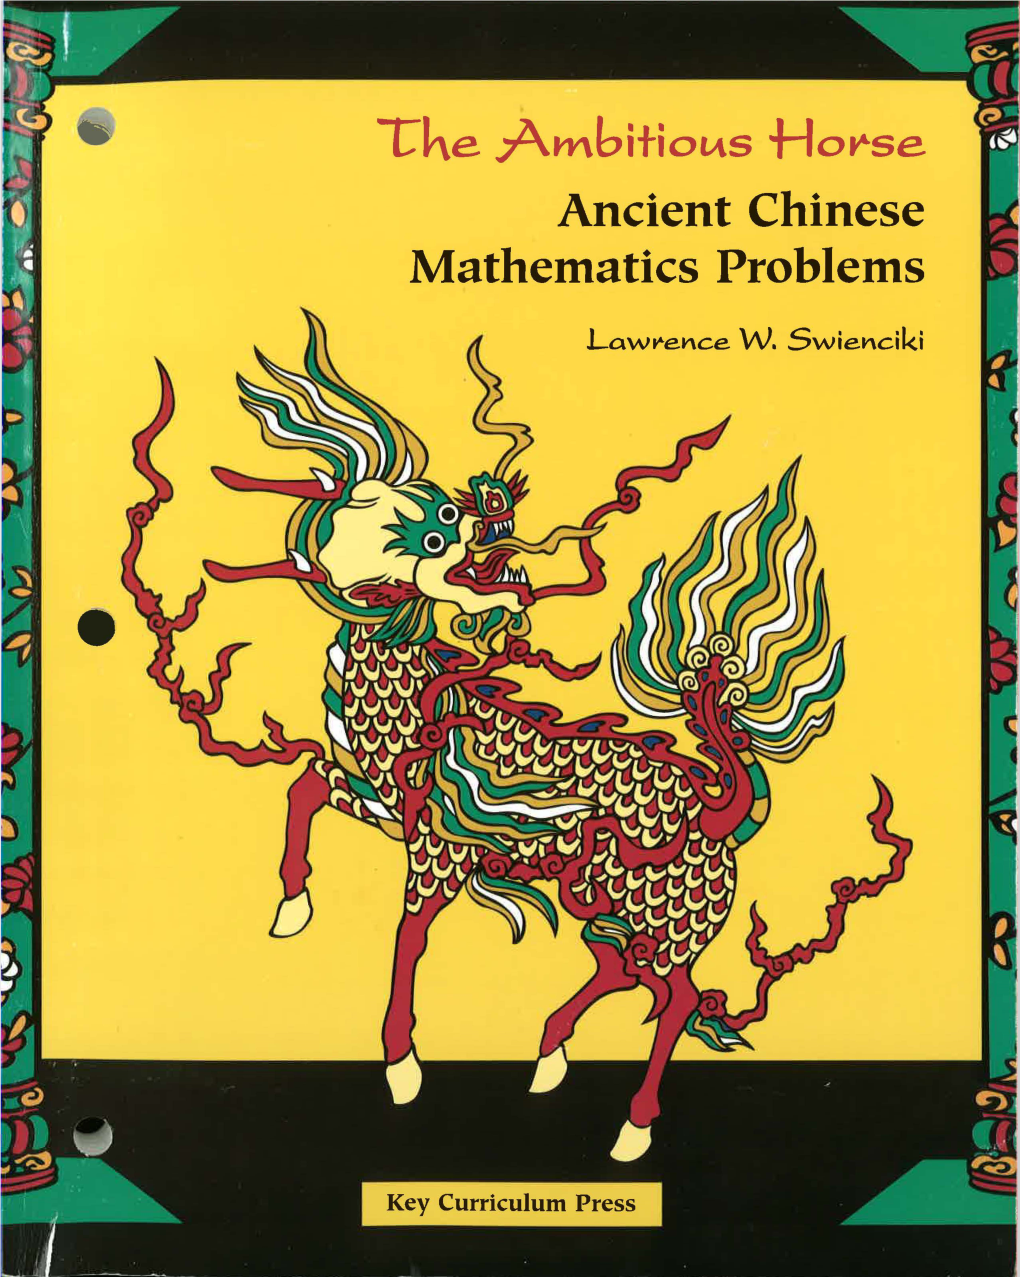 The Ambitious Horse: Ancient Chinese Mathematics Problems the Right to Reproduce Material for Use in His Or Her Own Classroom